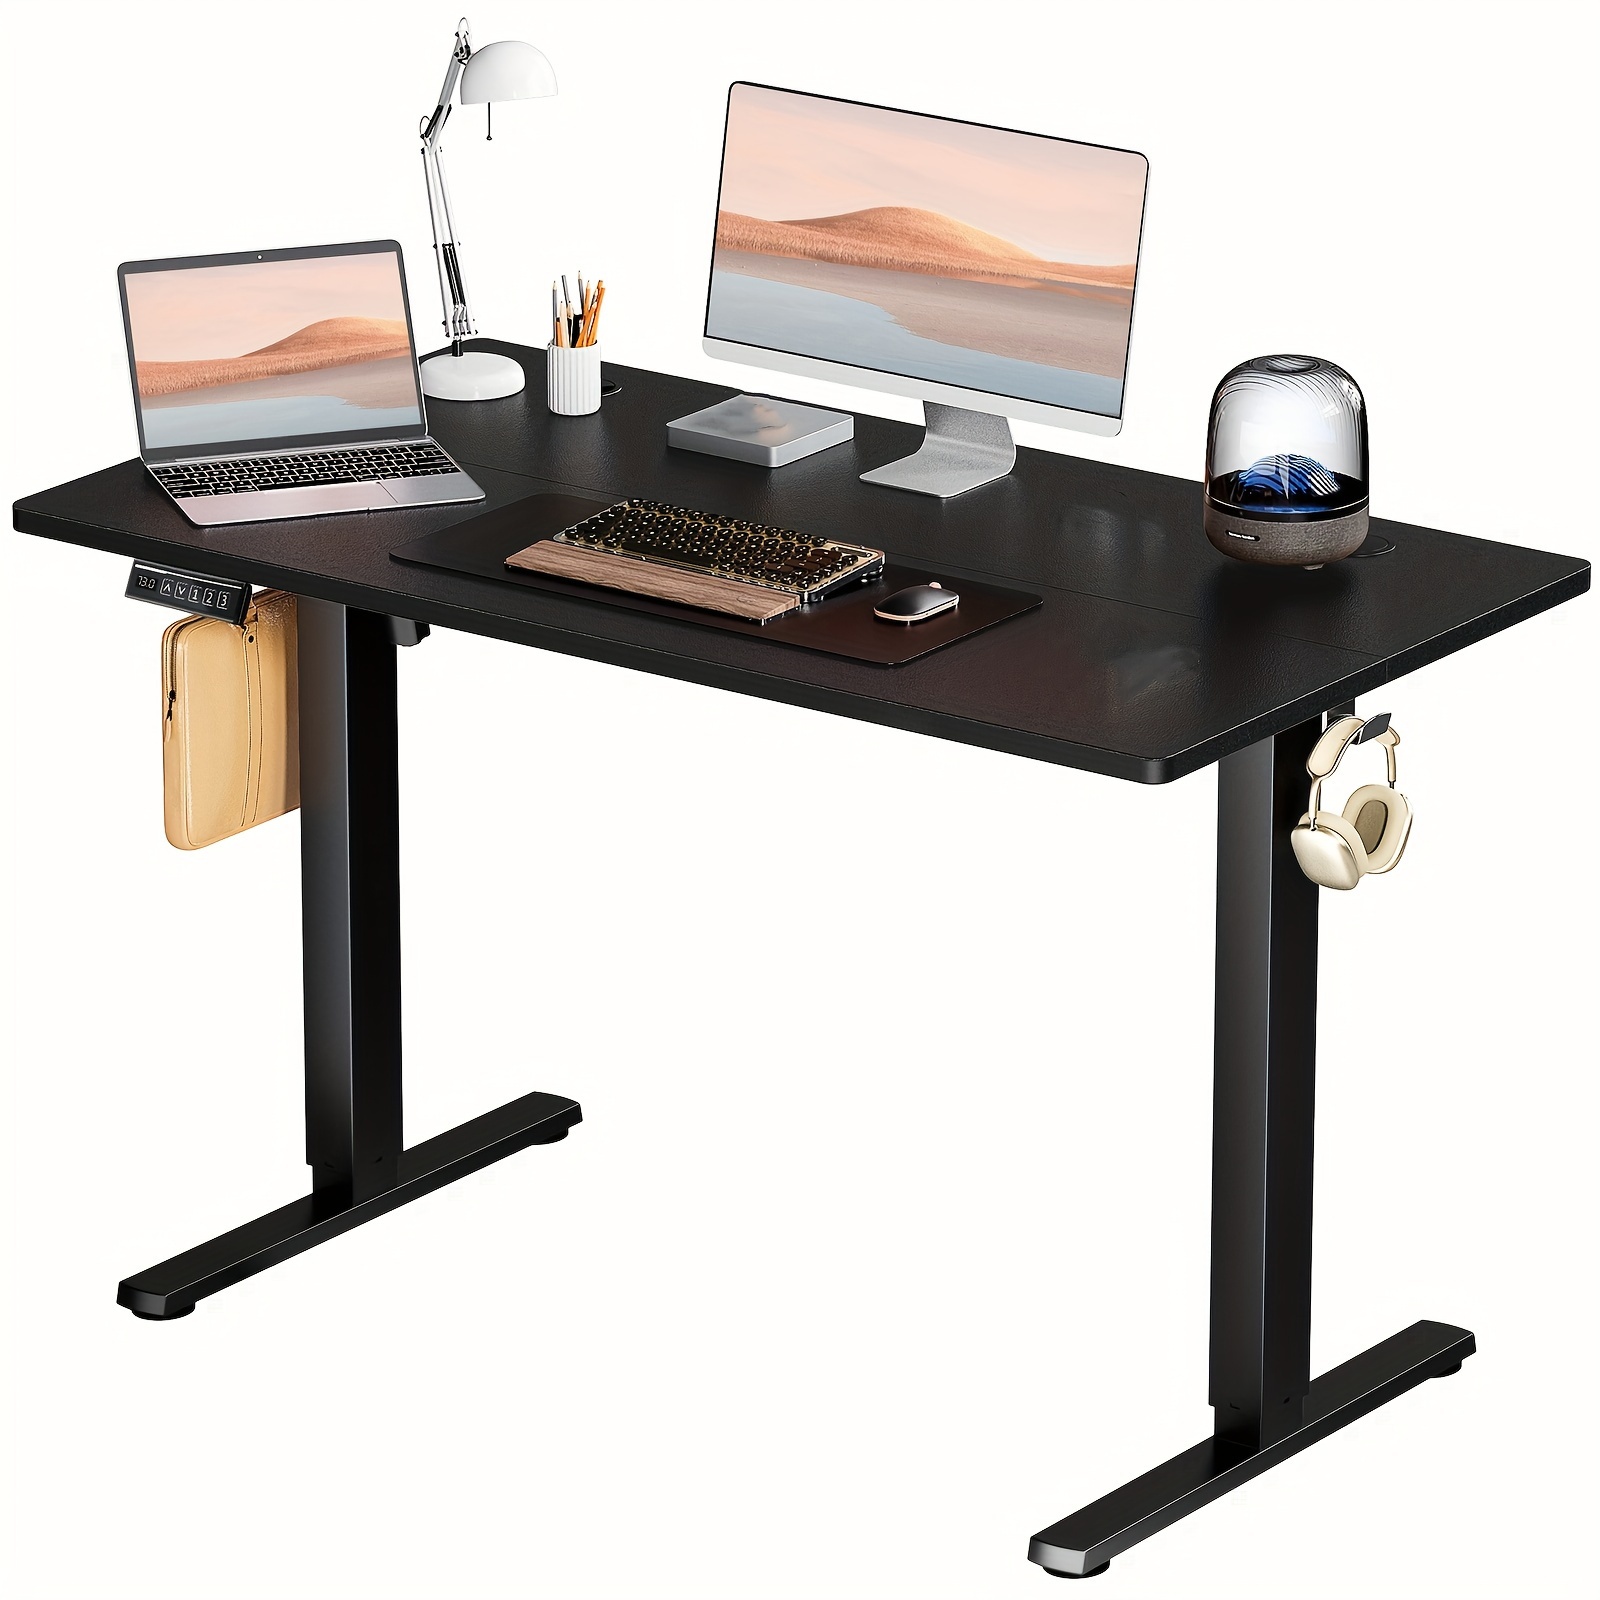 

Olixis Electric Standing Desk Height Adjustable 48x24 Inch Stand Up Sit Stand Computer Workstation Ergonomic Work Table With Preset Controller Metal Frame For Home Office